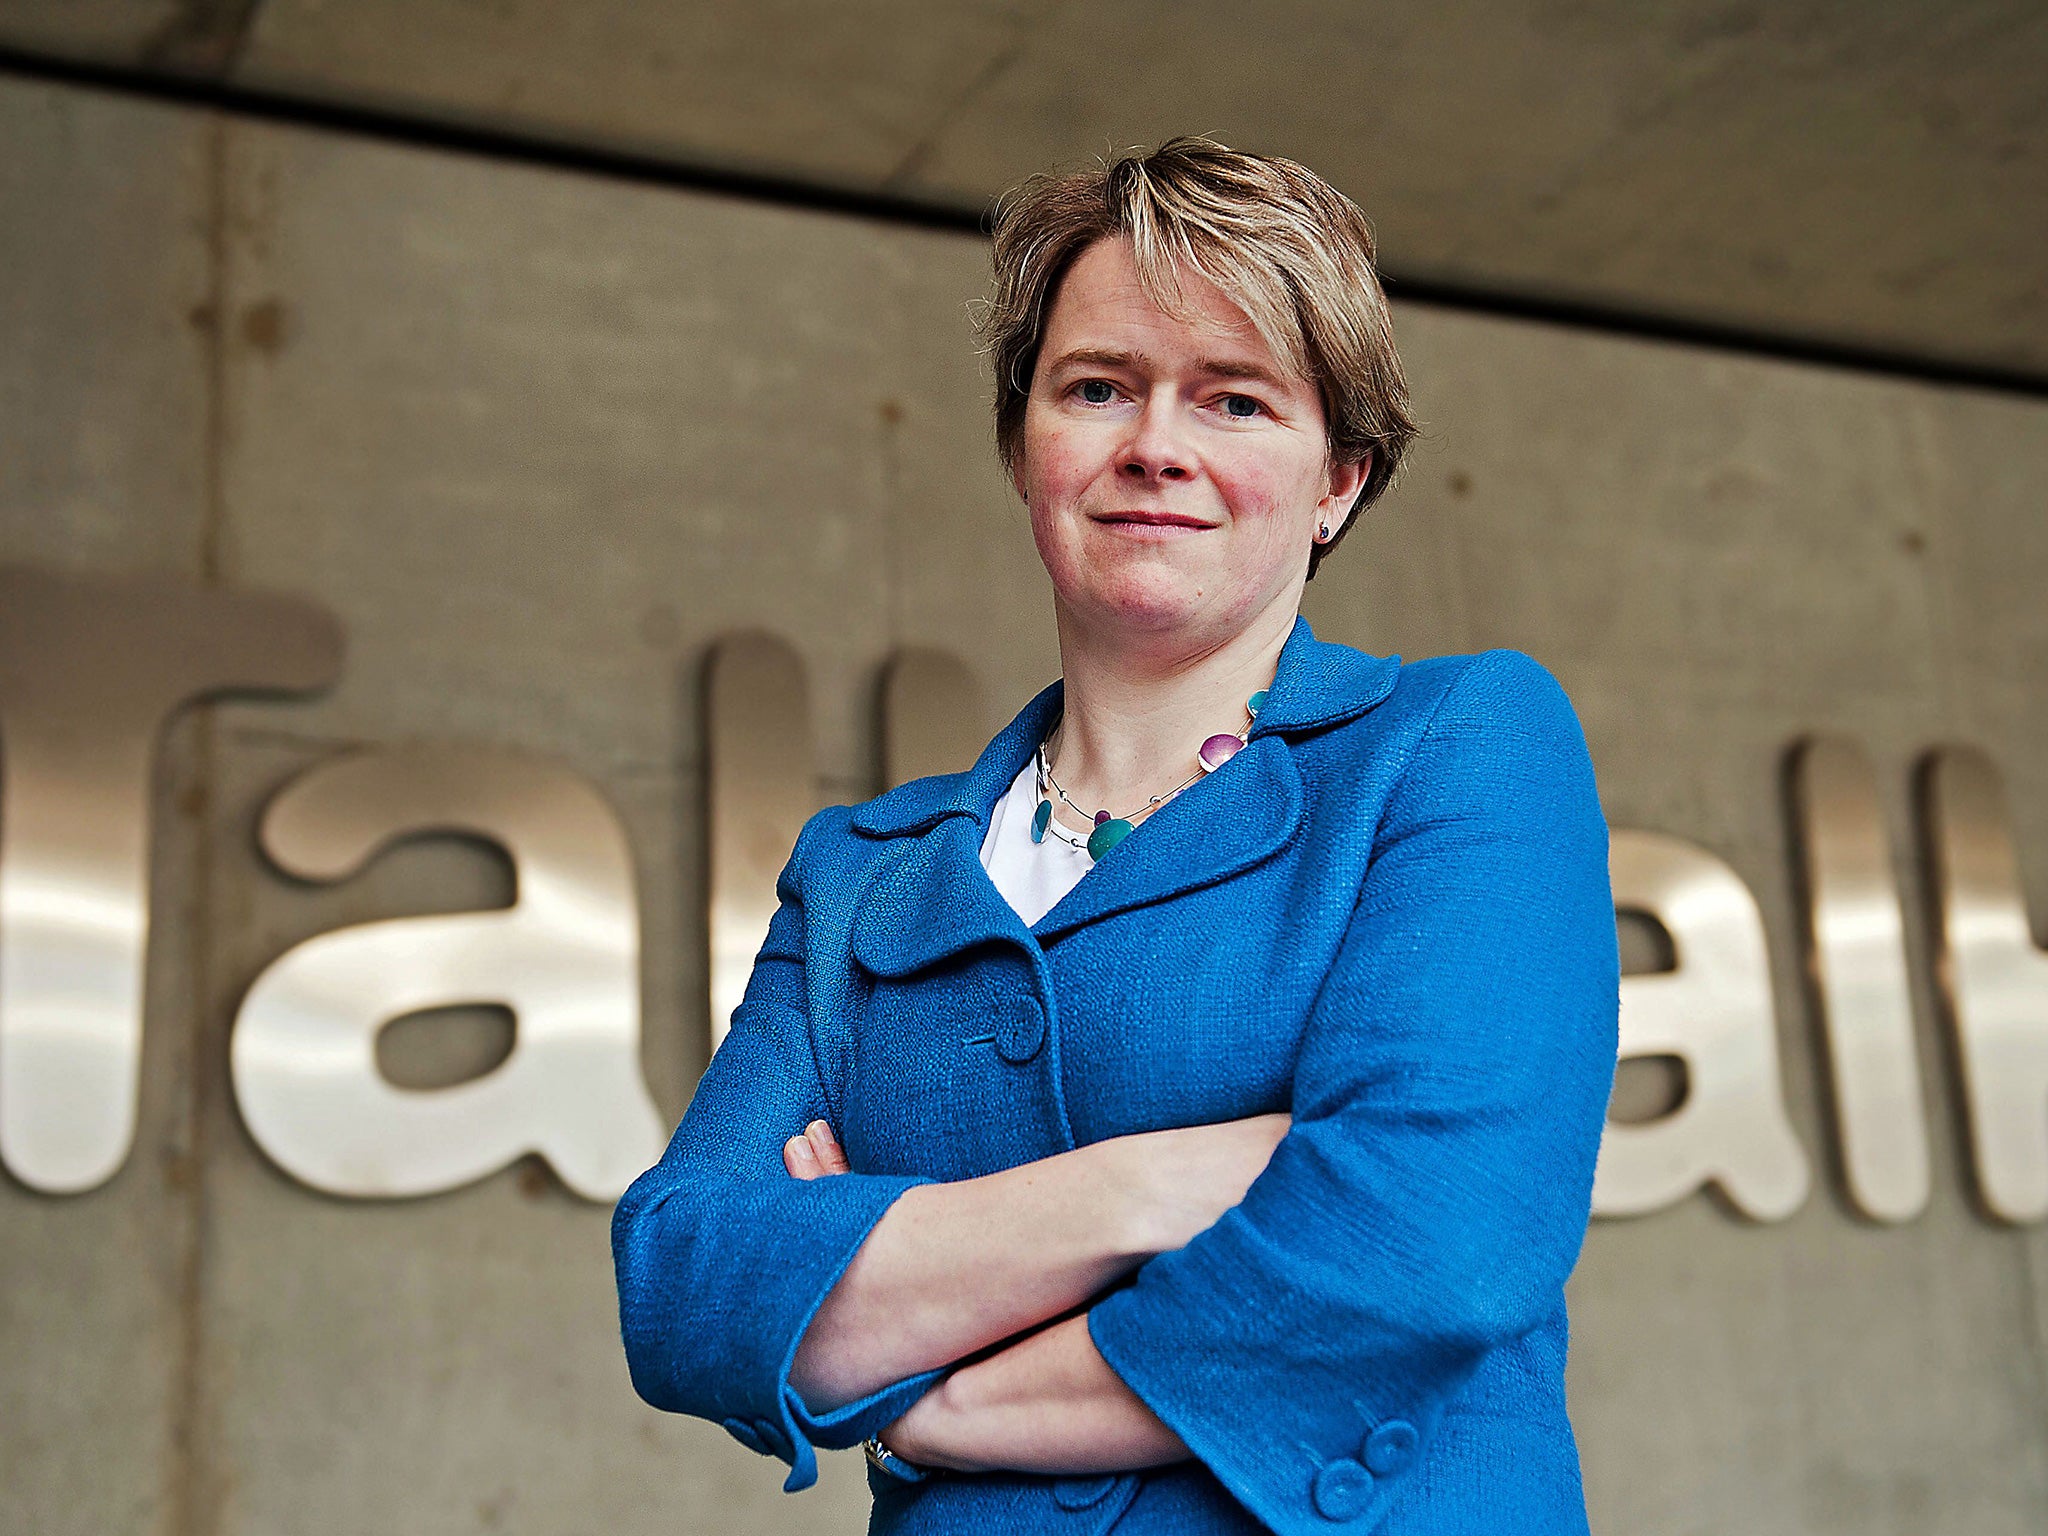 Chief executive of TalkTalk, Dido Harding, said she did not know the extent of unencrypted data